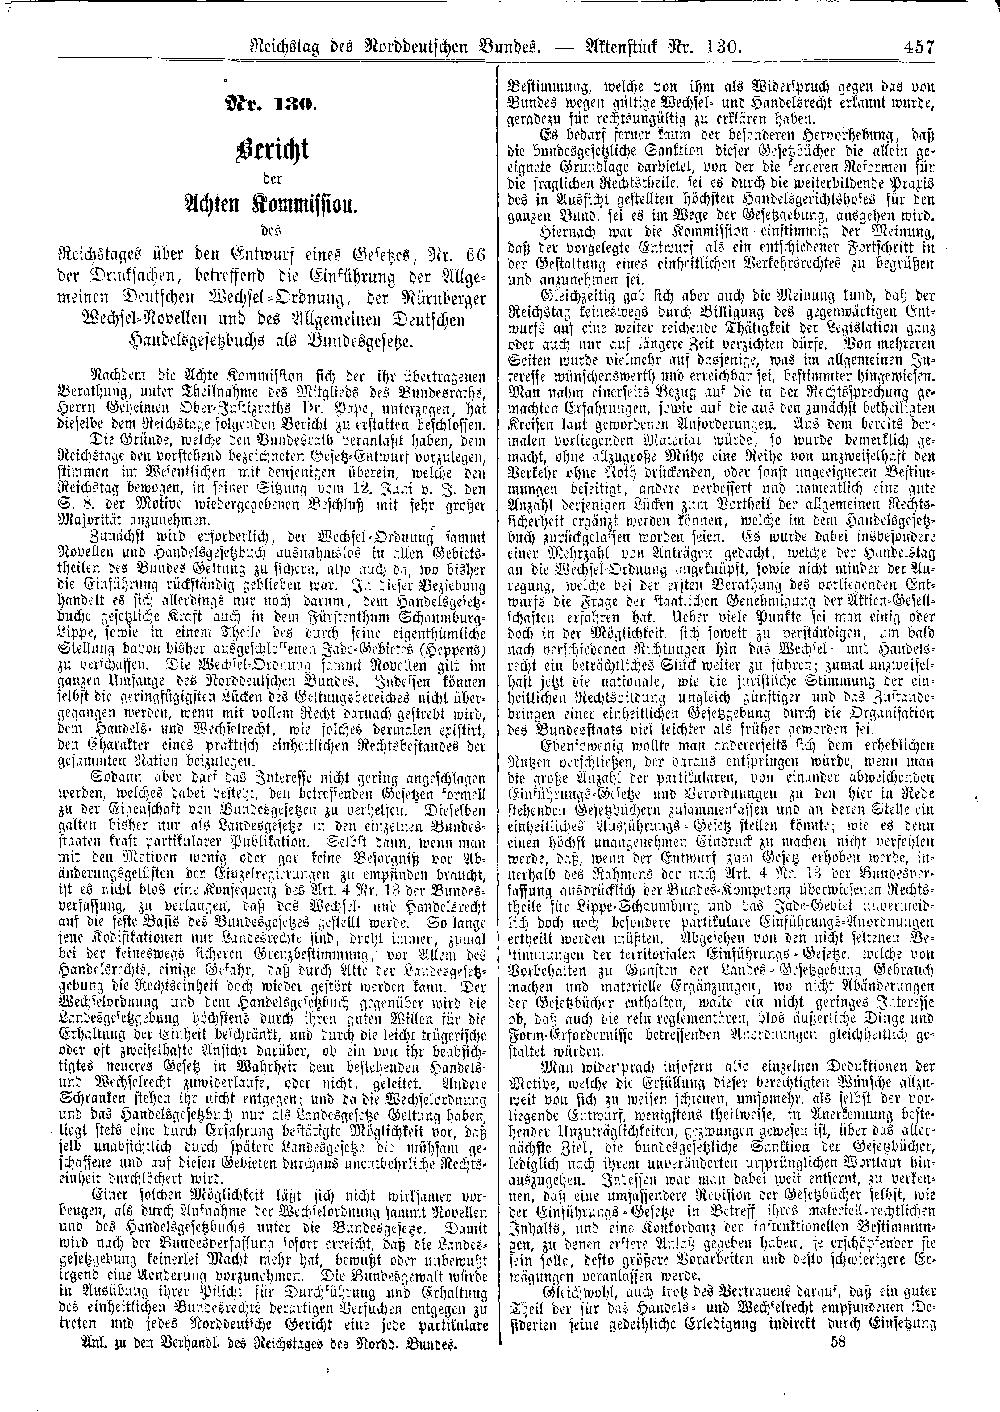 Scan of page 457